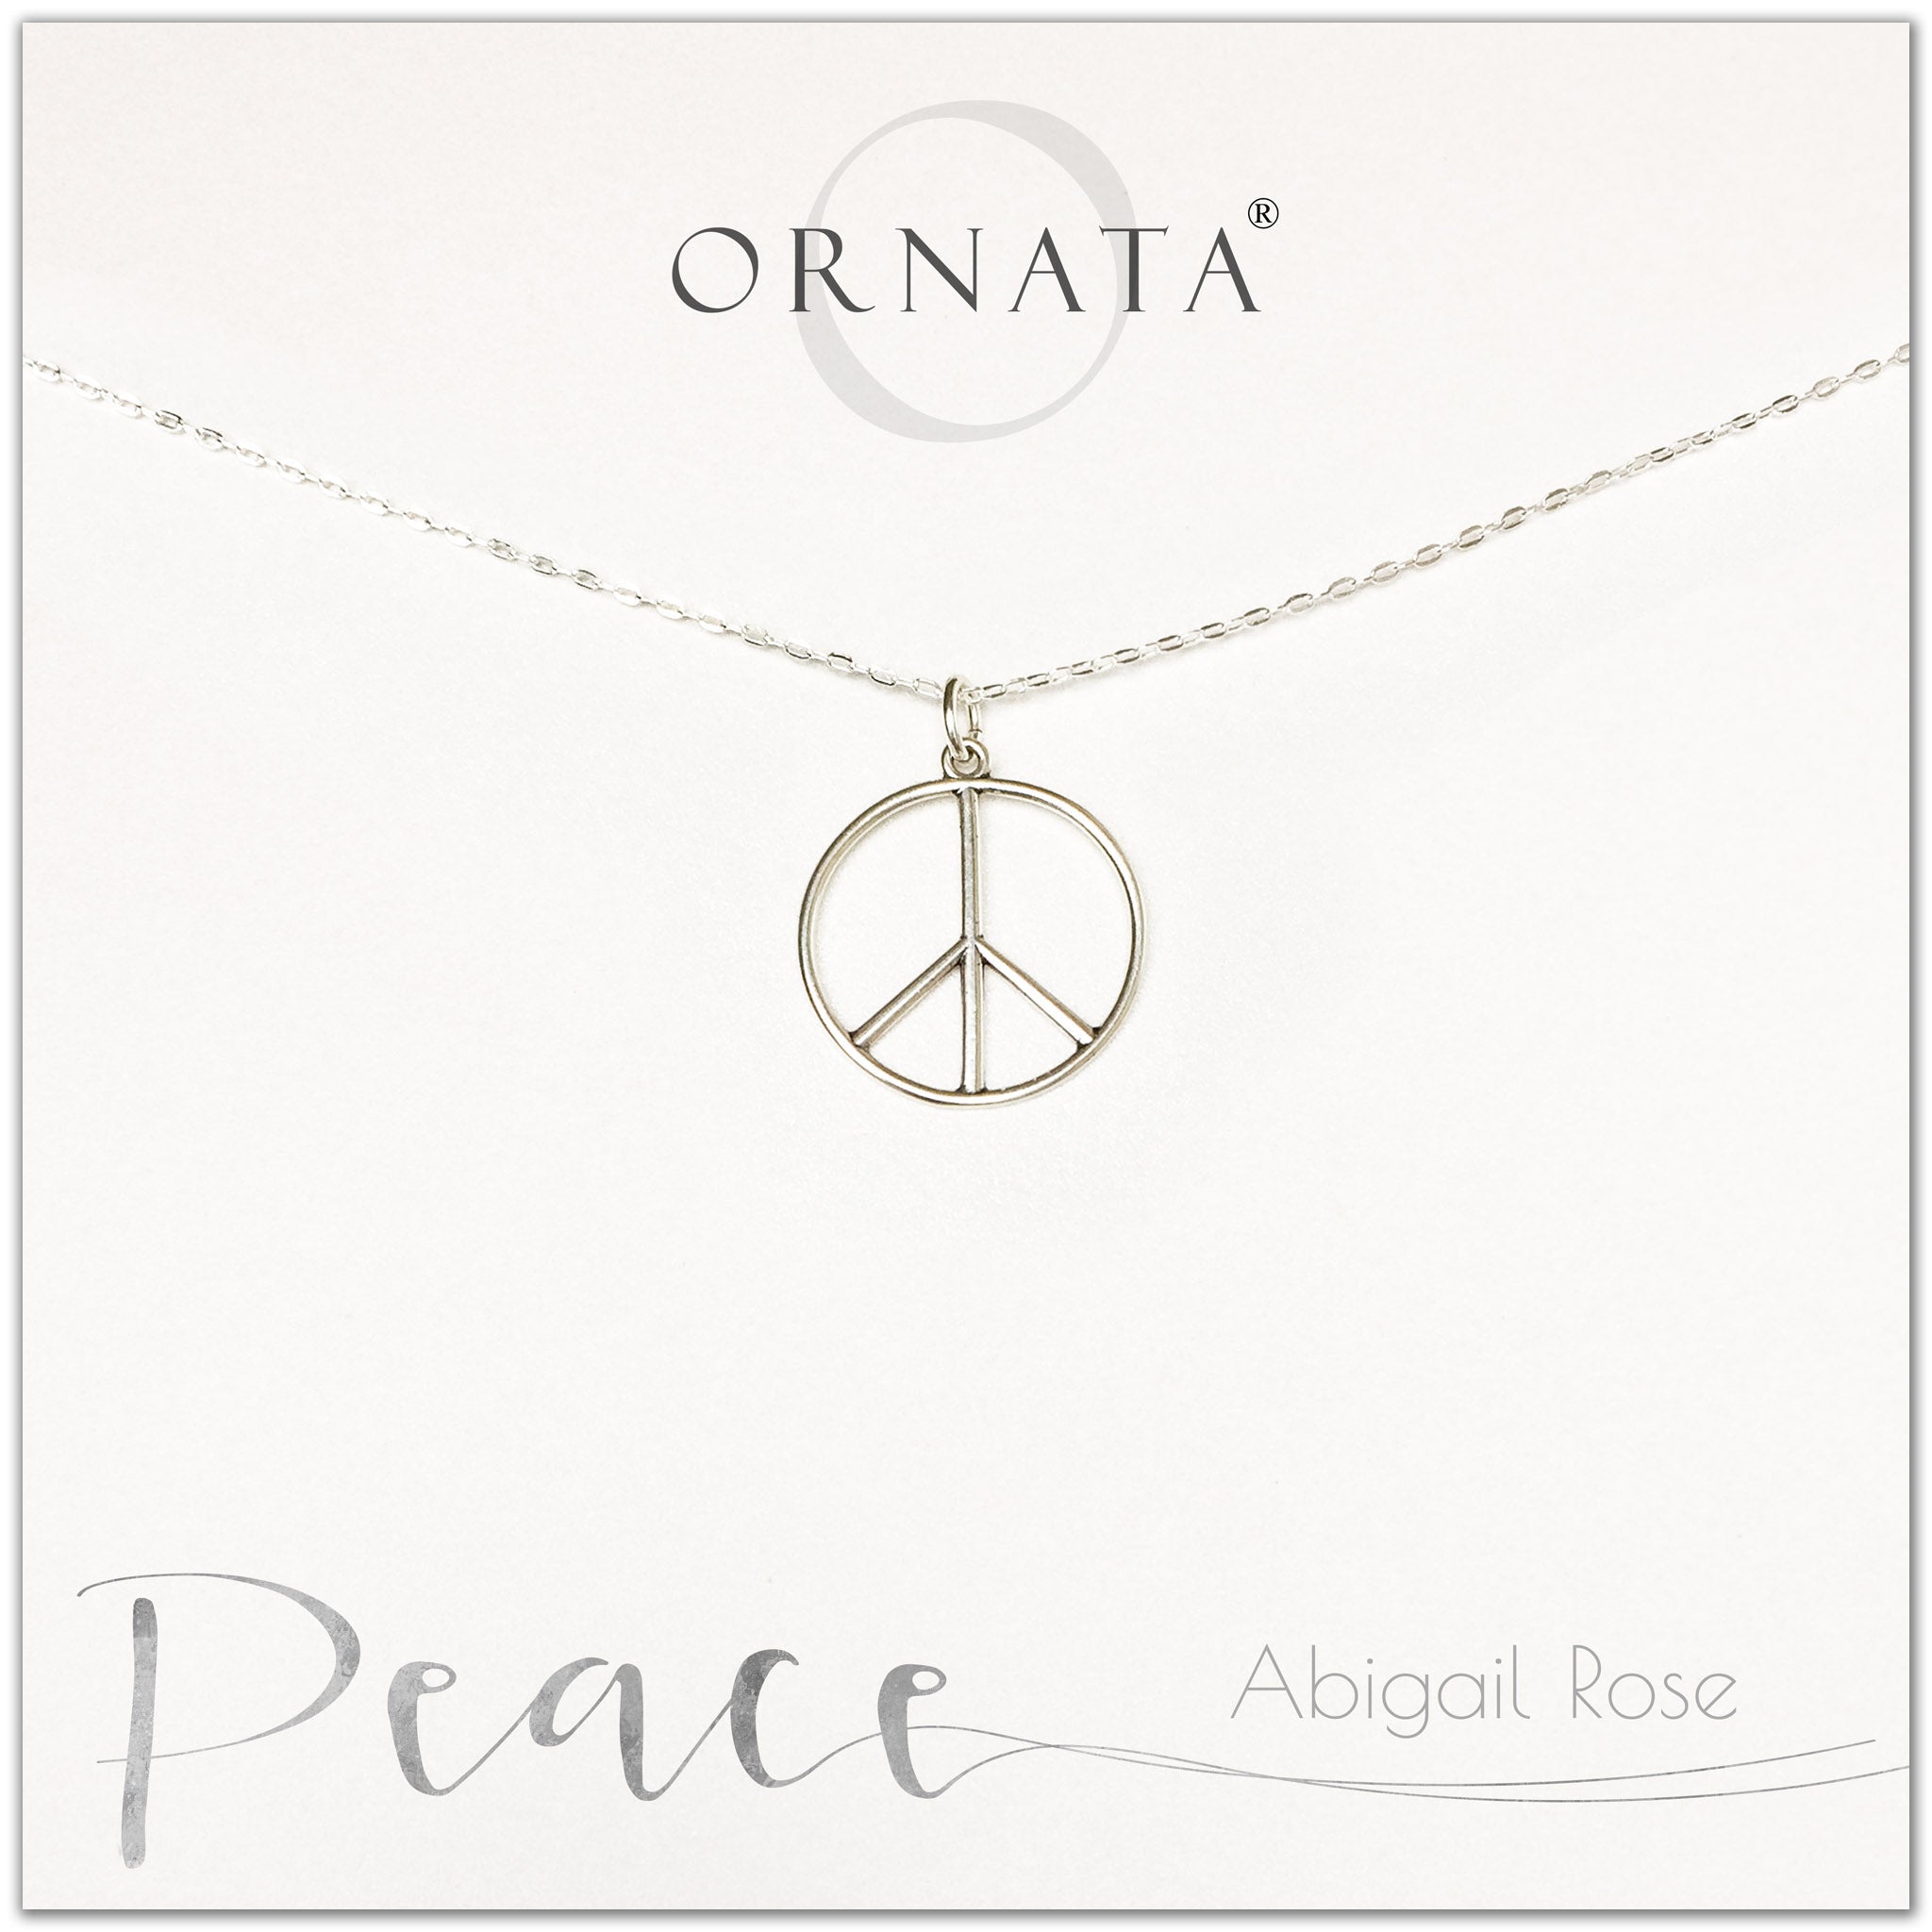 Peace necklace - personalized silver peace sign necklace. Our sterling silver custom jewelry is a perfect gift to symbolize peace with a delicate peace symbol charm. 